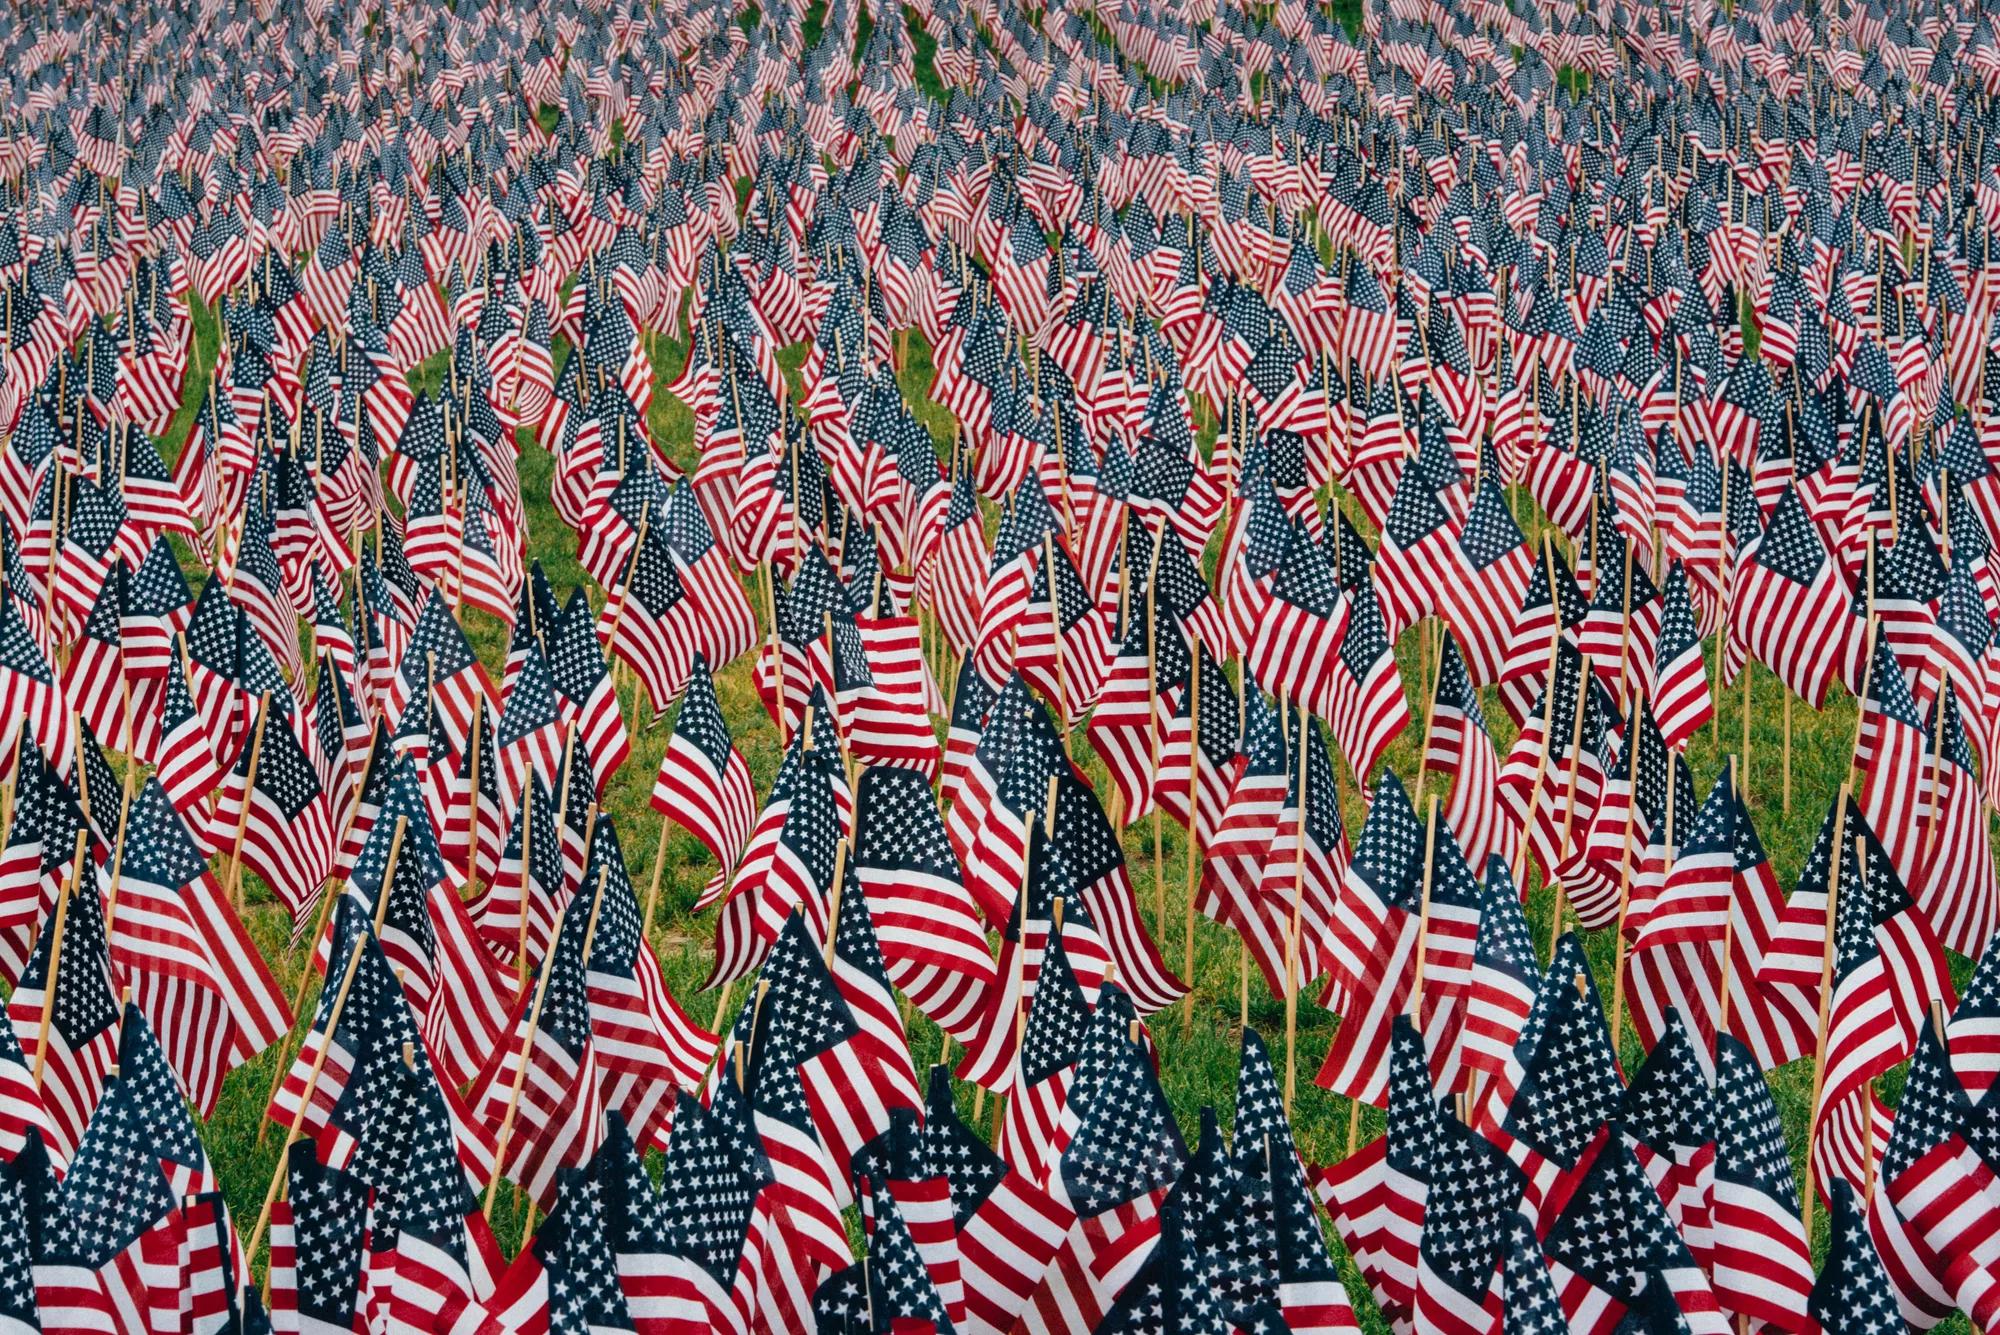 American flags stuck in the ground